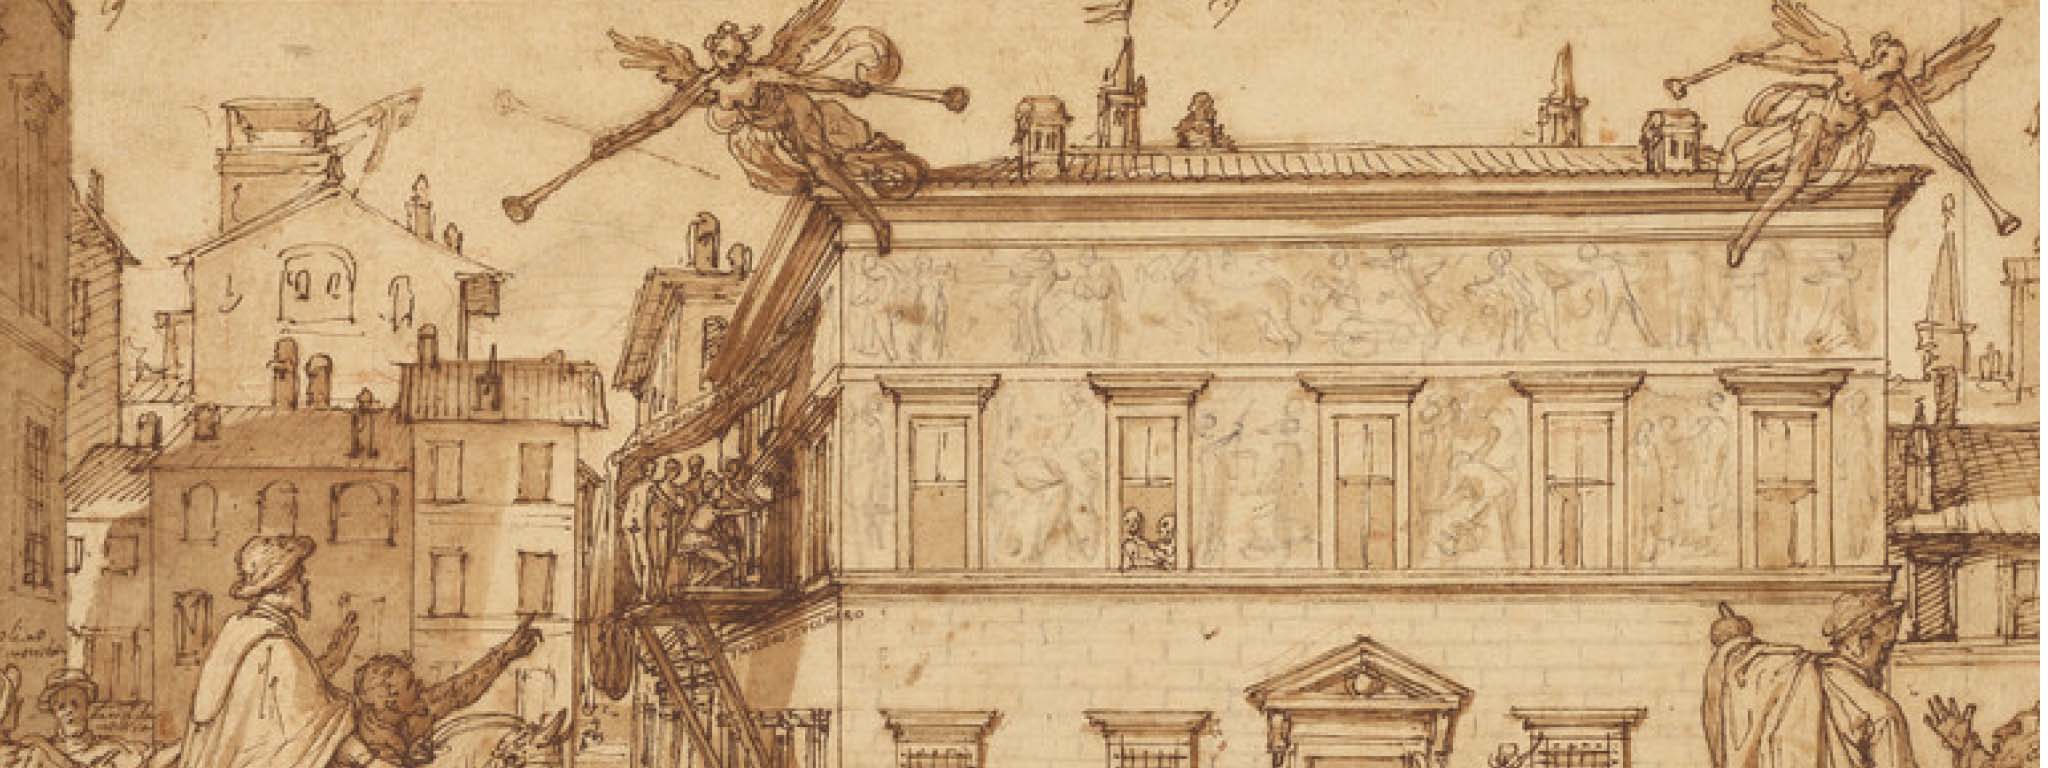 Taddeo Decorating the Facade of the Palazzo Mattei, about 1595, Federico Zuccaro, pen and brown ink and brush with brown wash over black chalk and touches of red chalk. Getty Museum